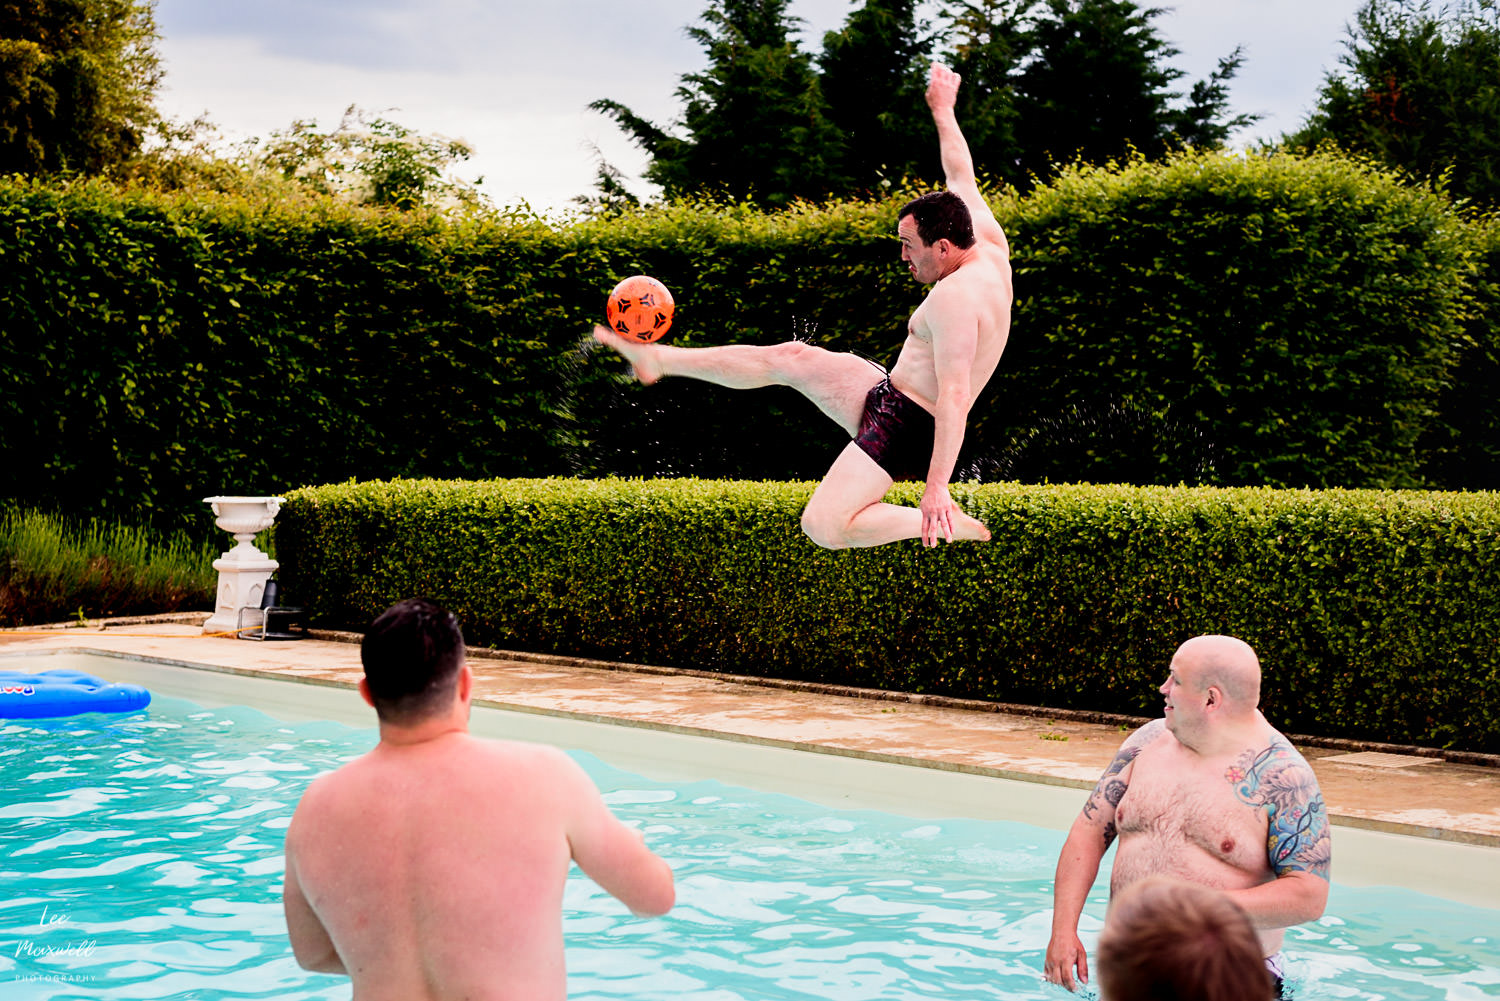 Football in the pool